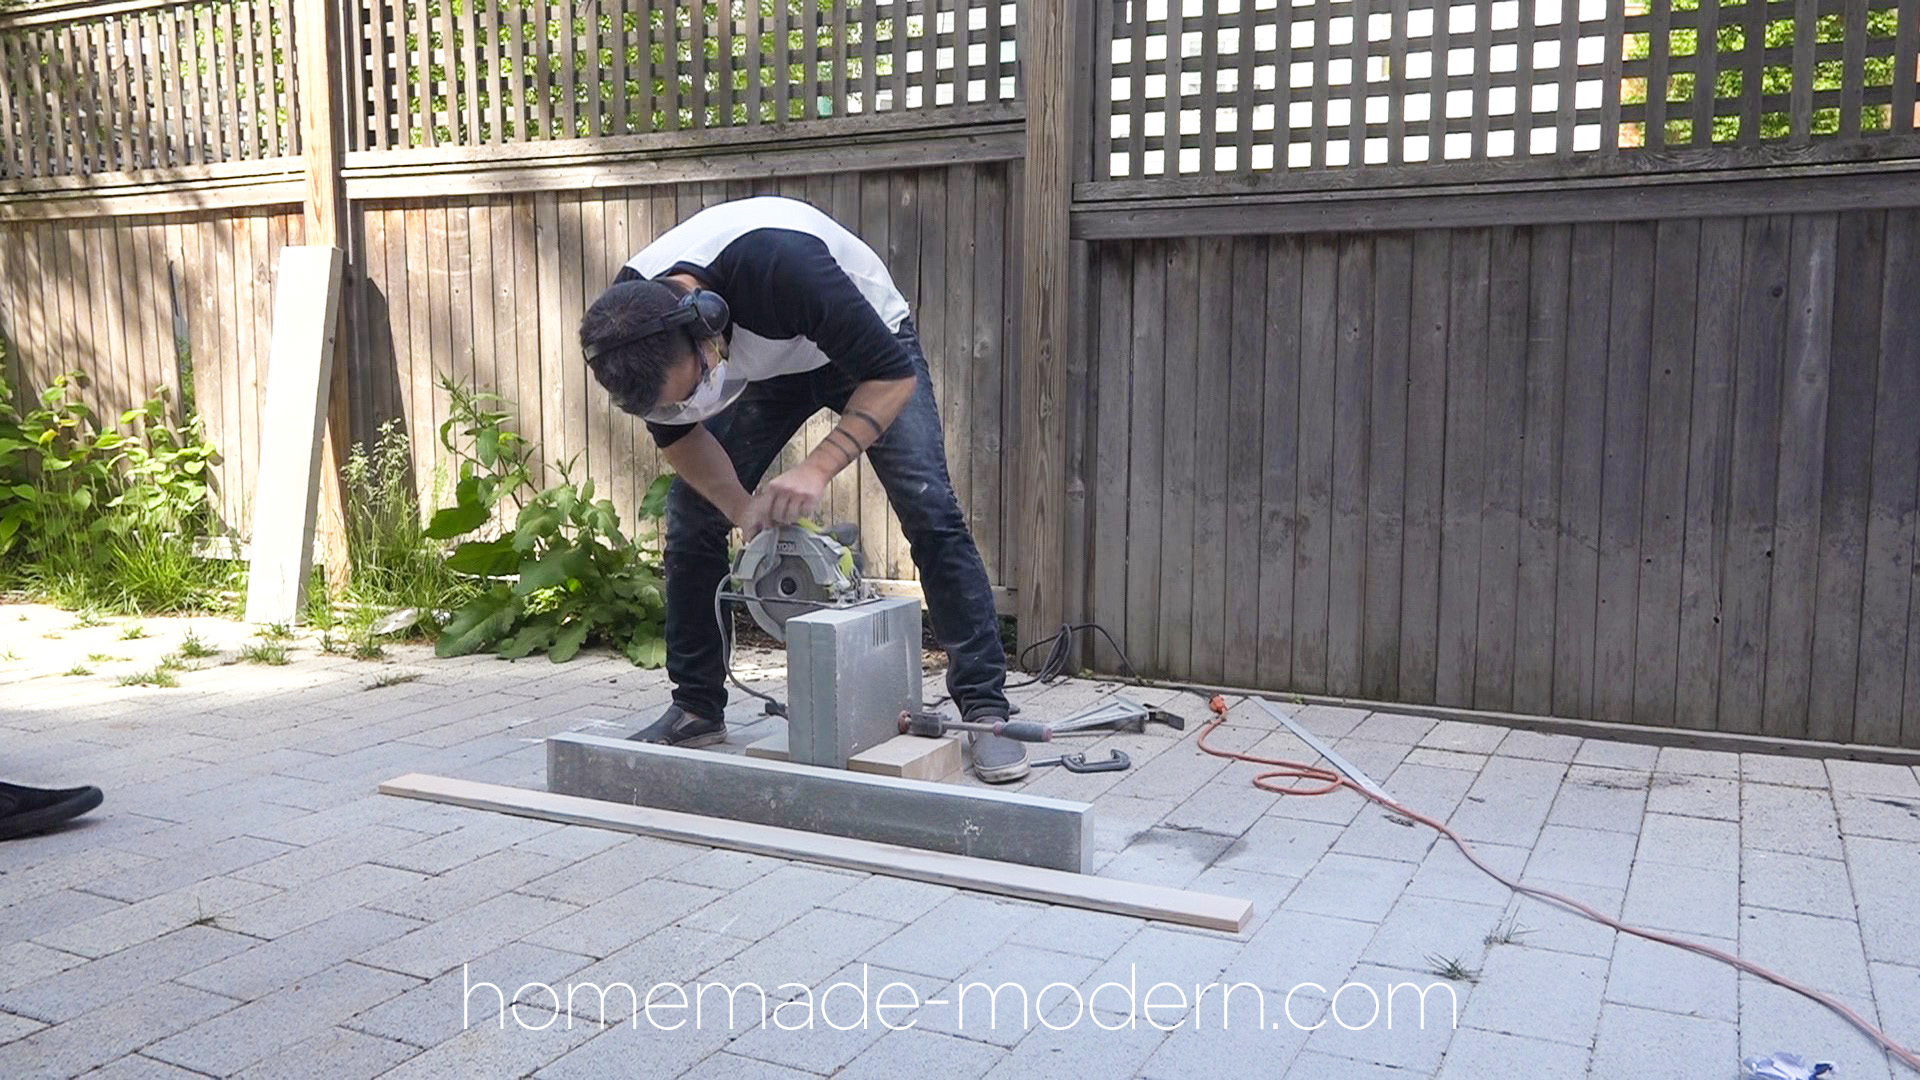 This DIY stone bench was made out of 2” thick slabs of bluestone that was cut with a standard circular saw. For more information go to HomeMade-Modern.com